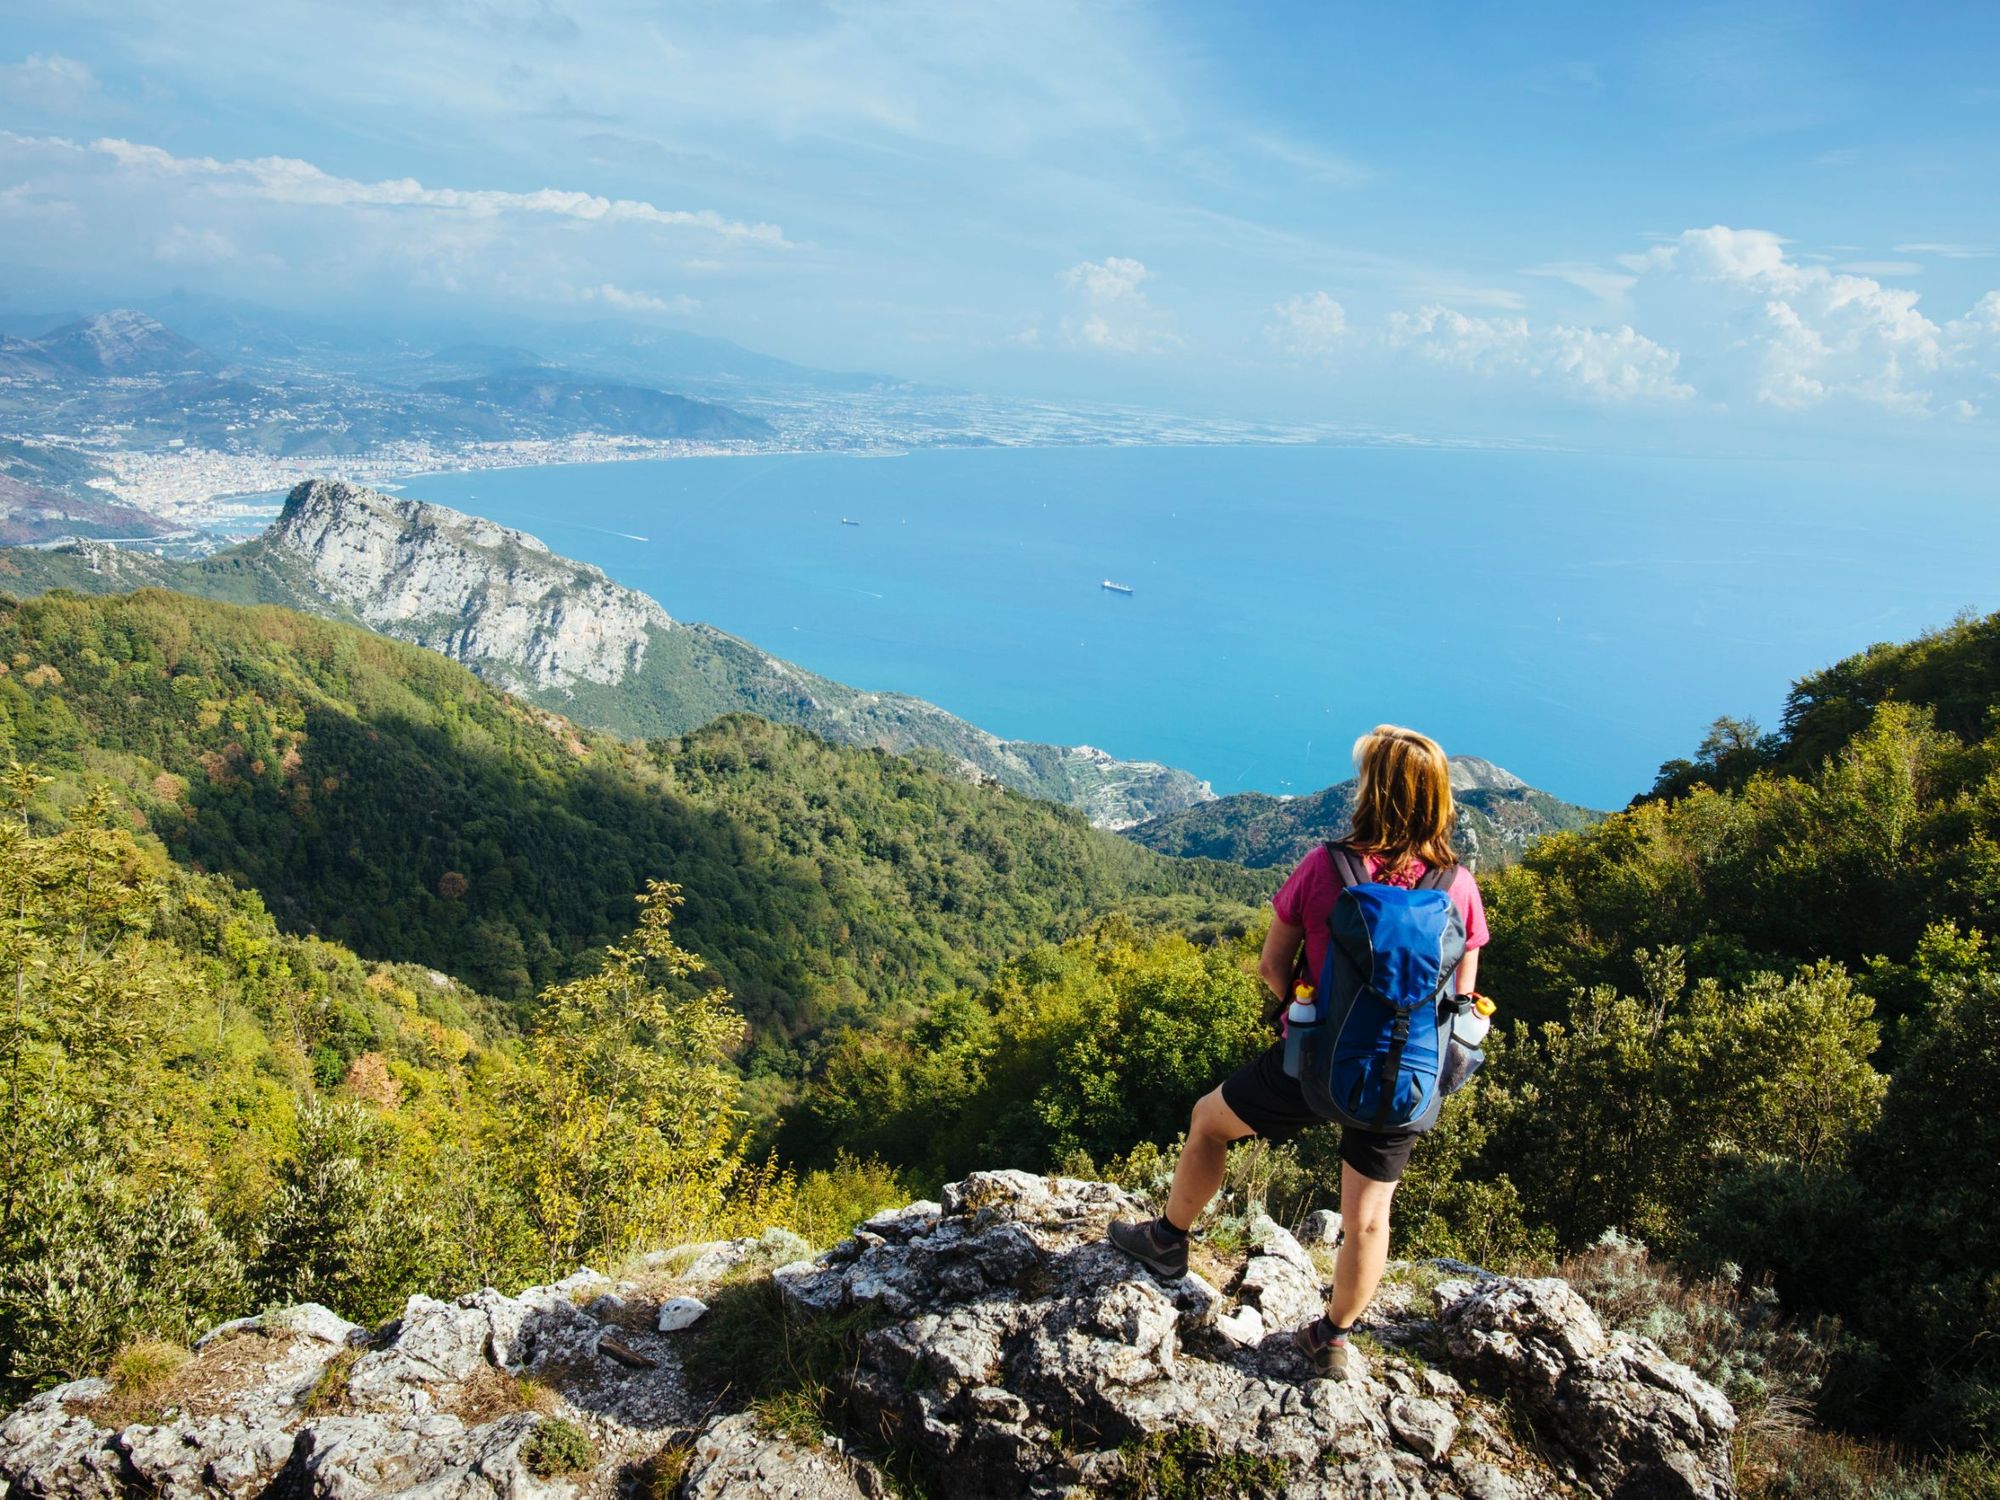 Just one of the stunning viewpoints you can reach if you head off the beaten path on the Amalfi Coast. Photo: Getty